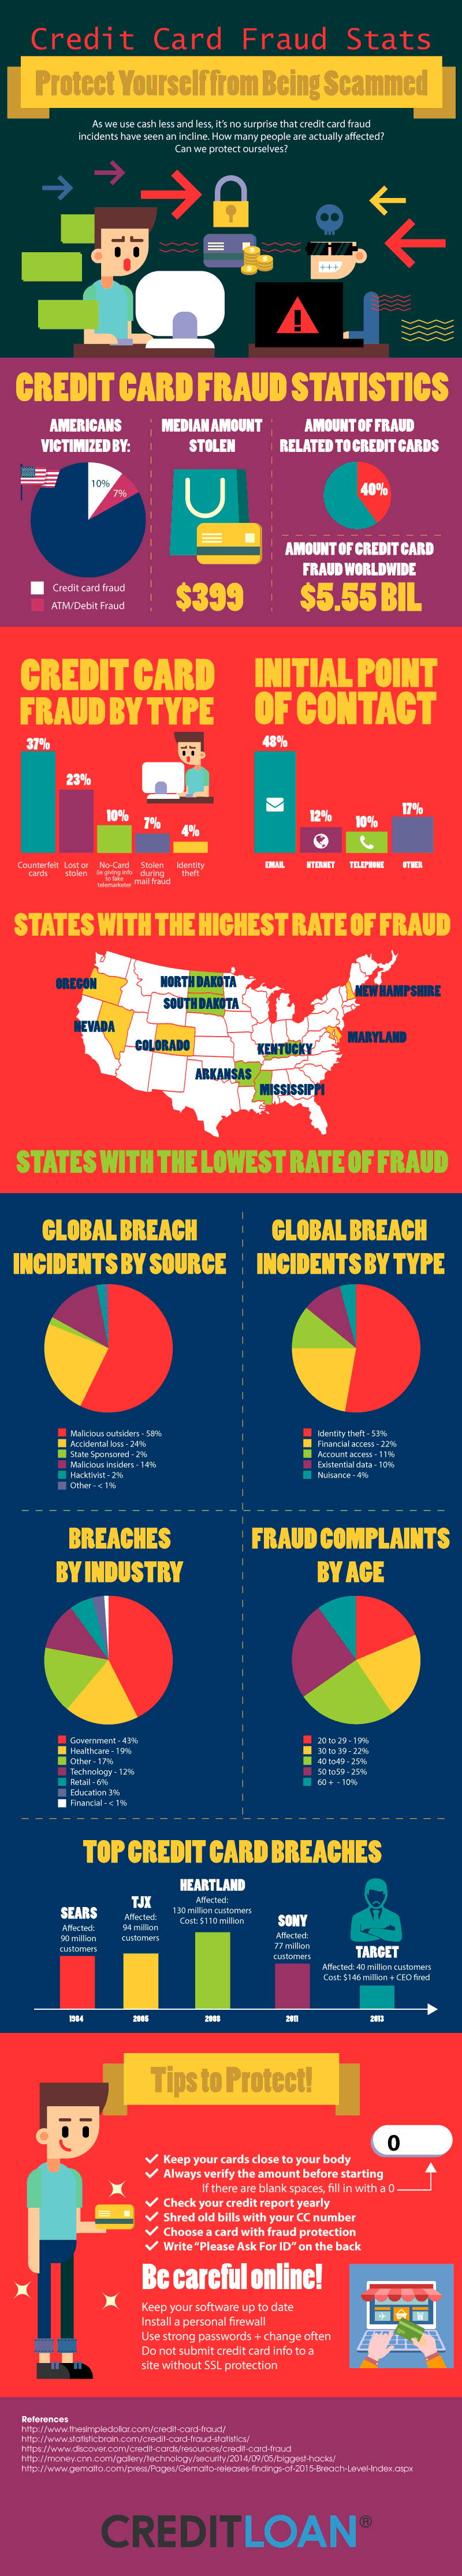 Credit-Card-Fraud-Stats---Protect-Yourself-from-Being-Scammed